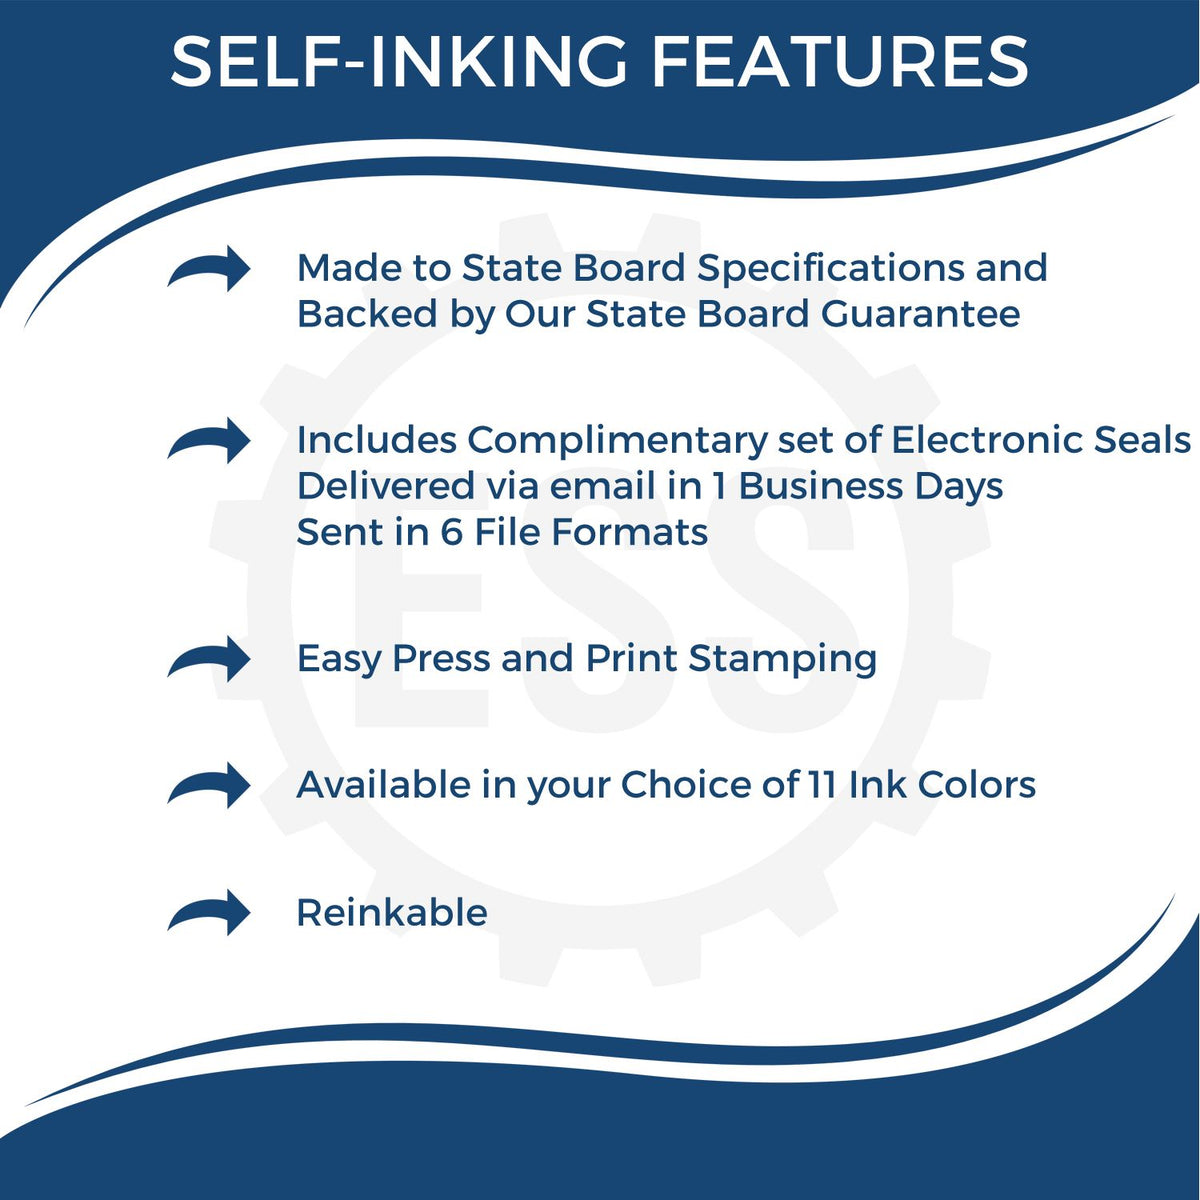 A picture of an infographic highlighting the selling points for the Self-Inking Rectangular Puerto Rico Notary Stamp